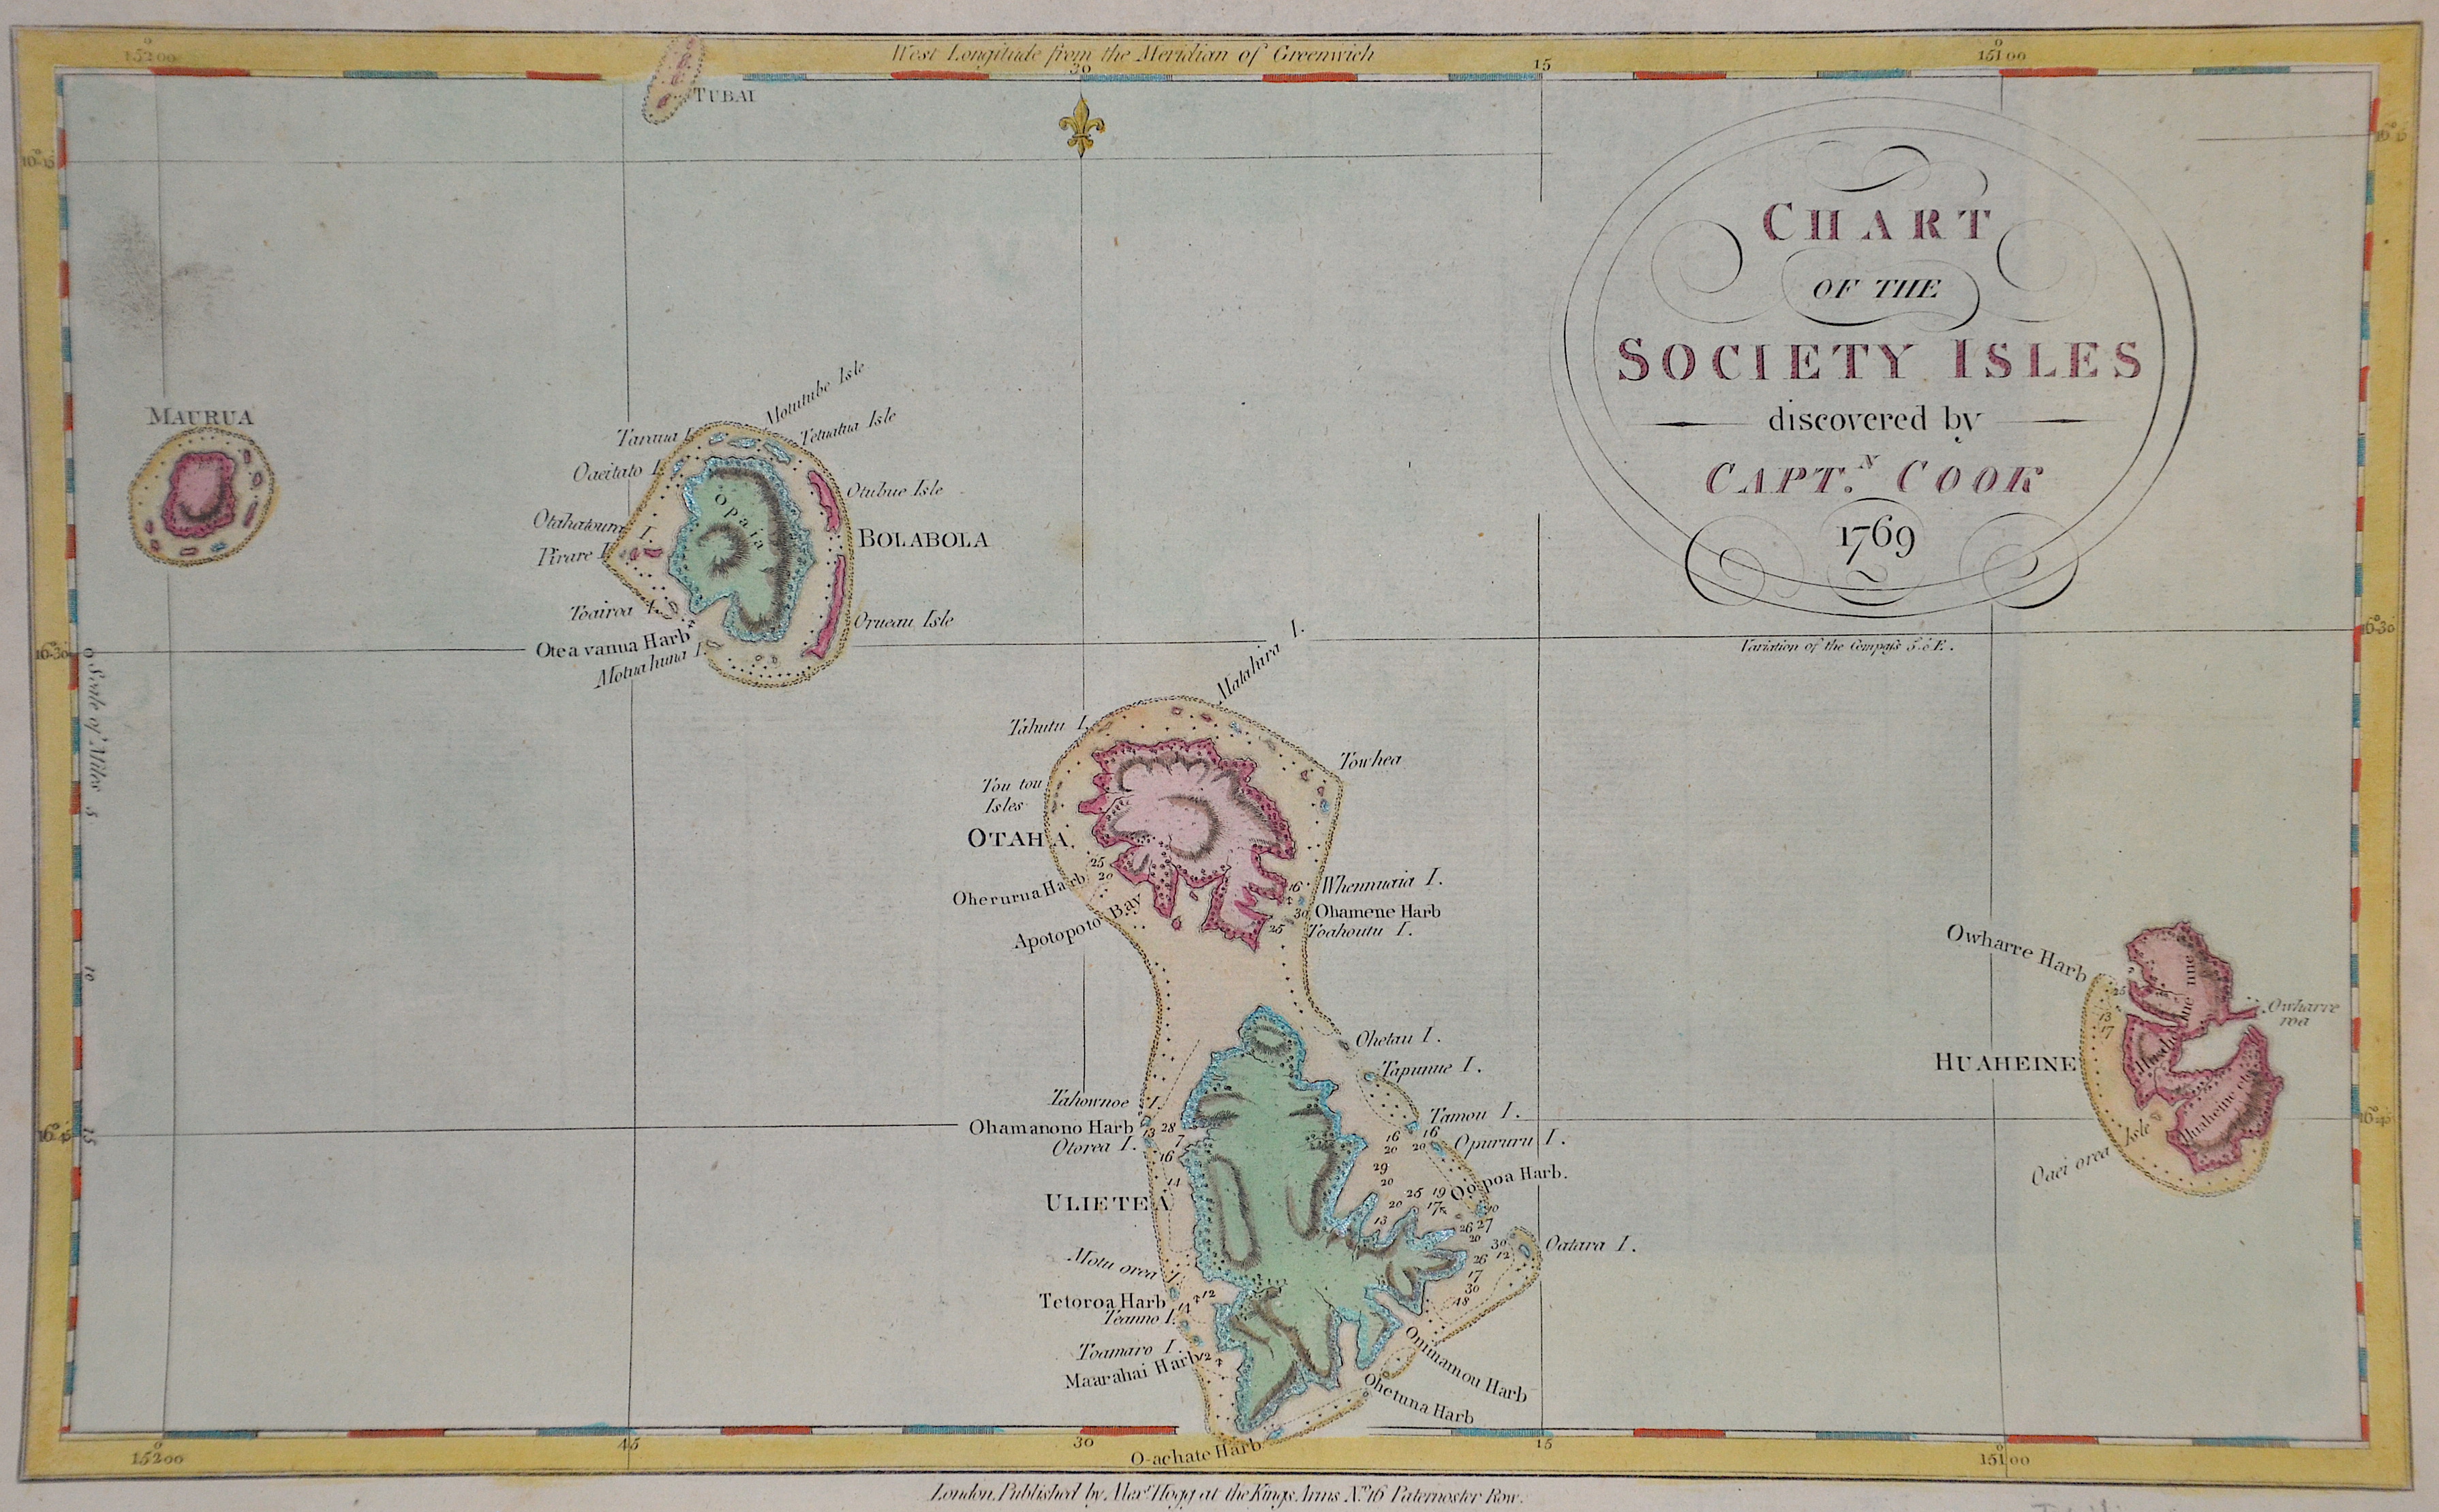 Chart of the Society Isles discovered by Capt. Cook 1769